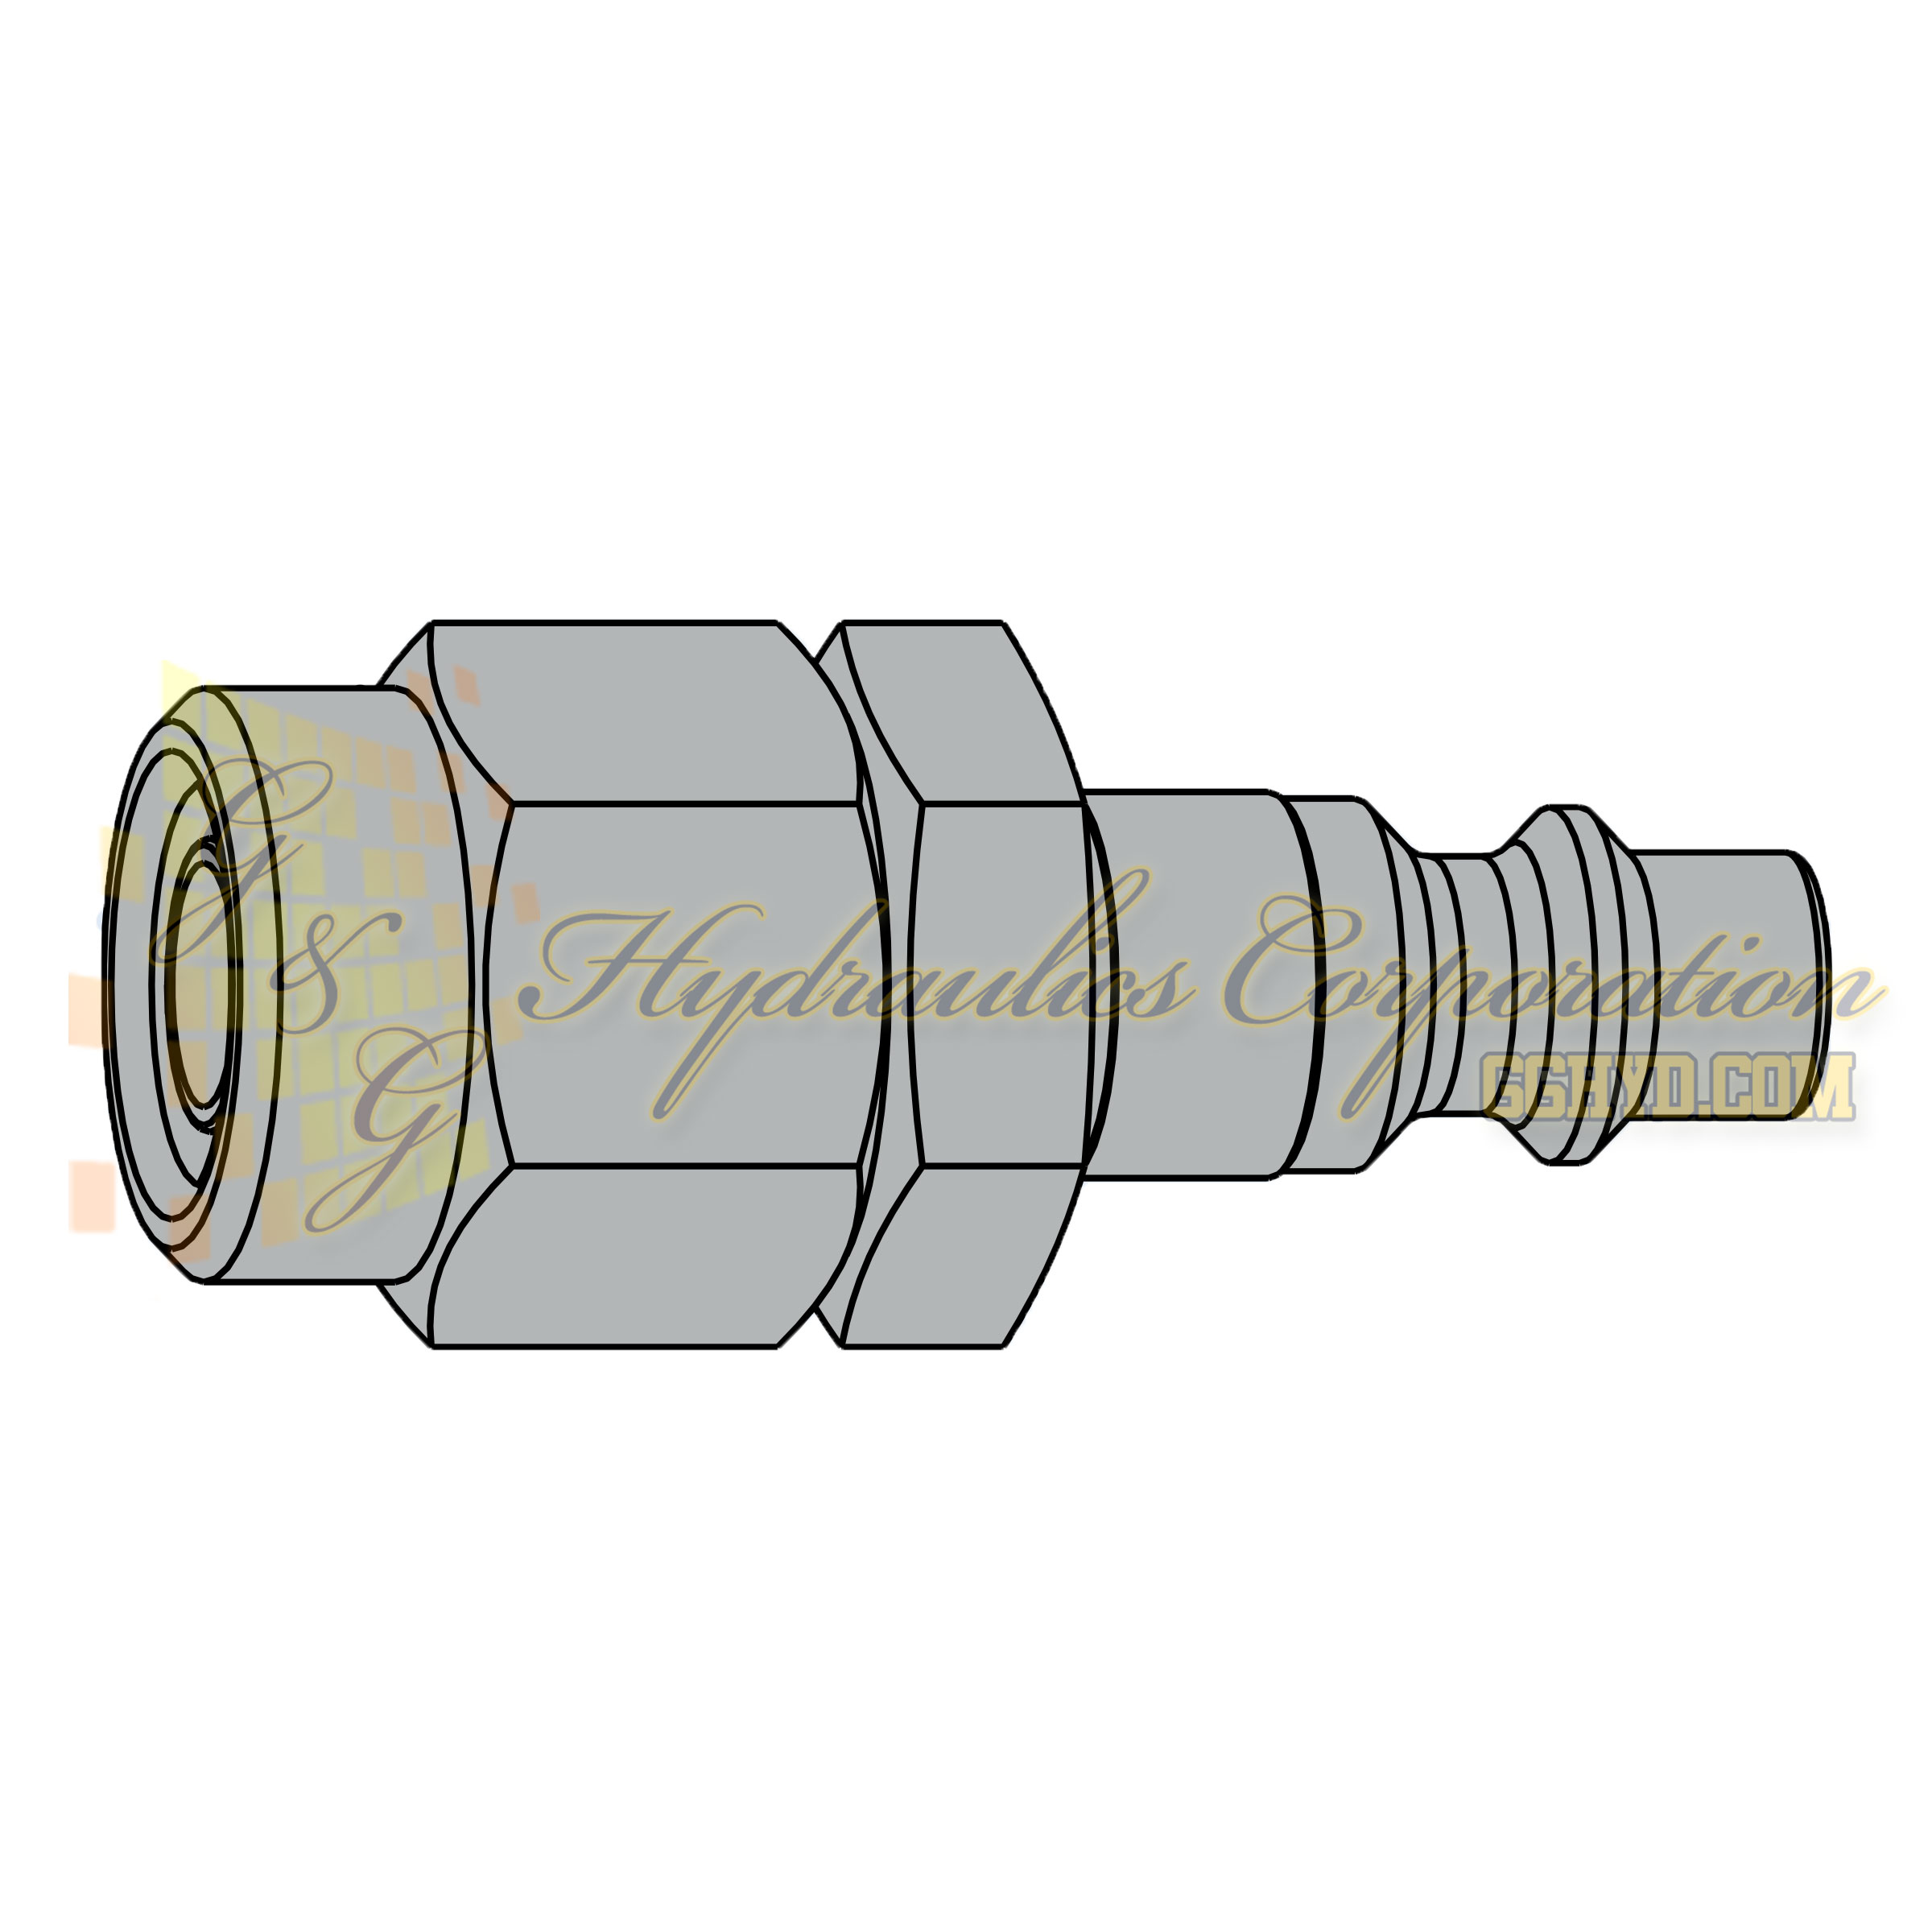 10-310-5062 CEJN Quick Disconnect Nipple, 8x12 mm Stream-Line connection, 232 PSI (16 bar)